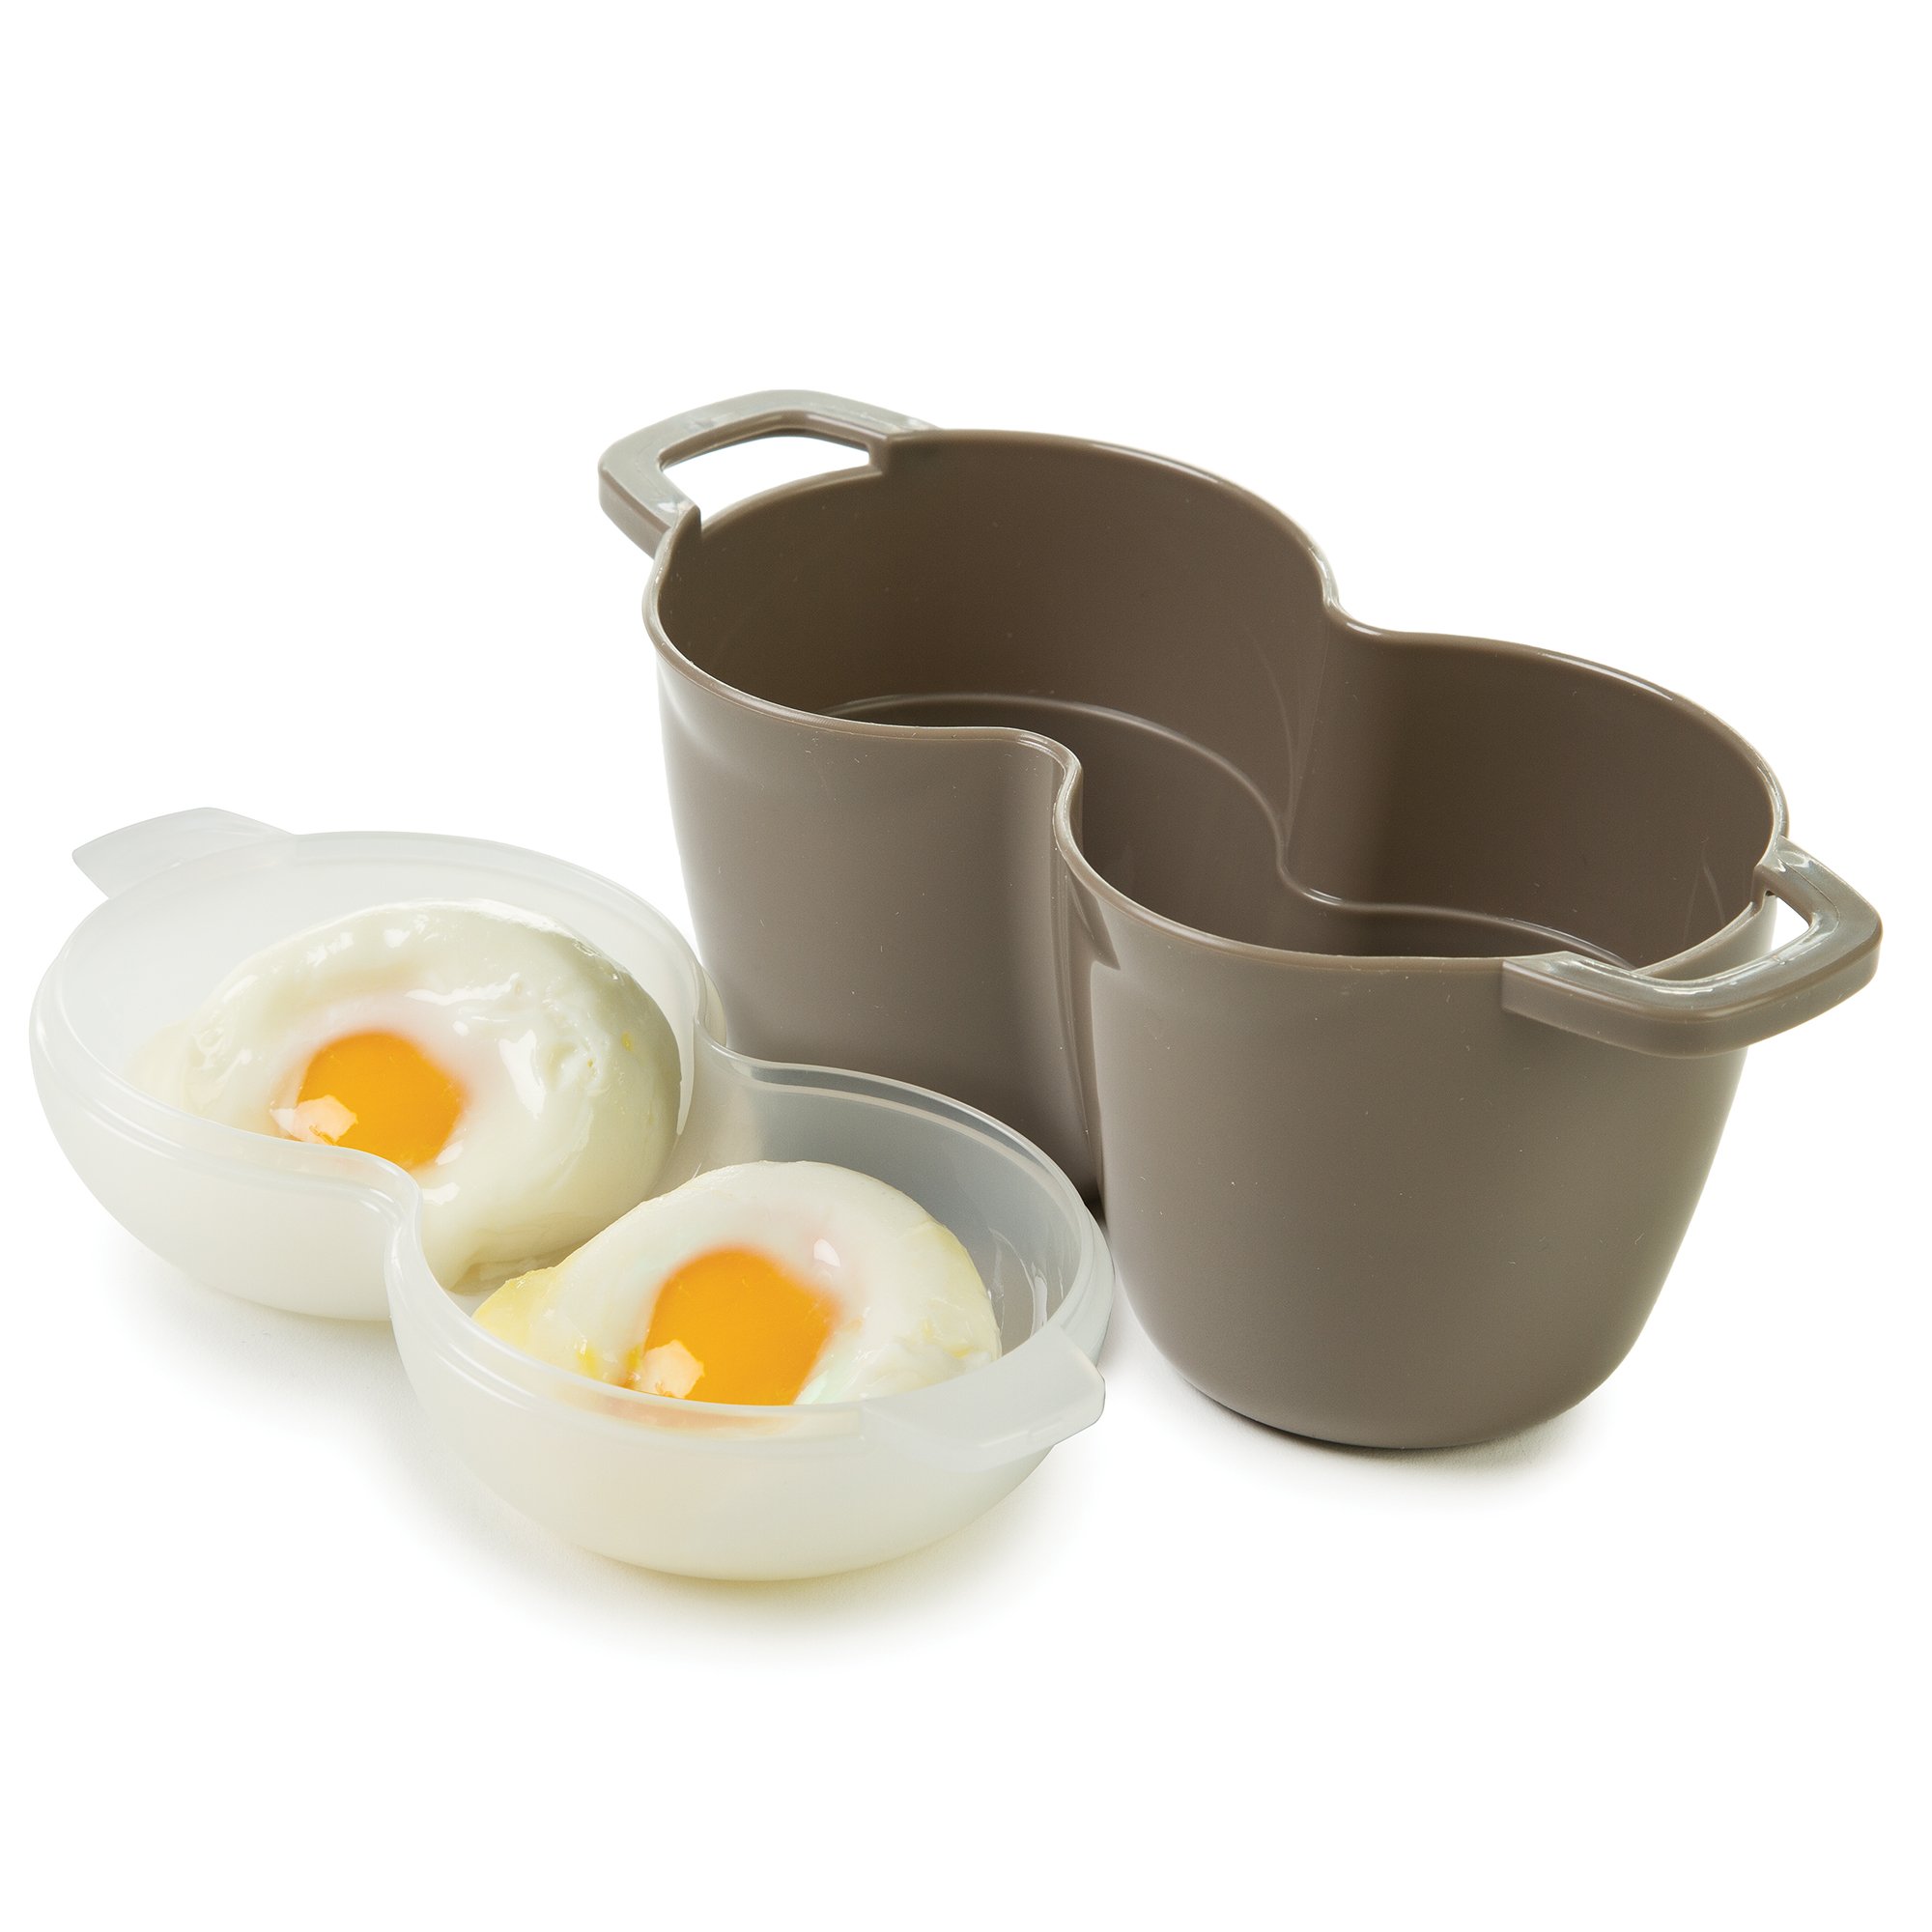 Prep Solutions by Progressive Microwave Poach Perfect - Poach Perfect Eggs, No-Mess, Odor Free, BPA FREE, Dishwasher Safe